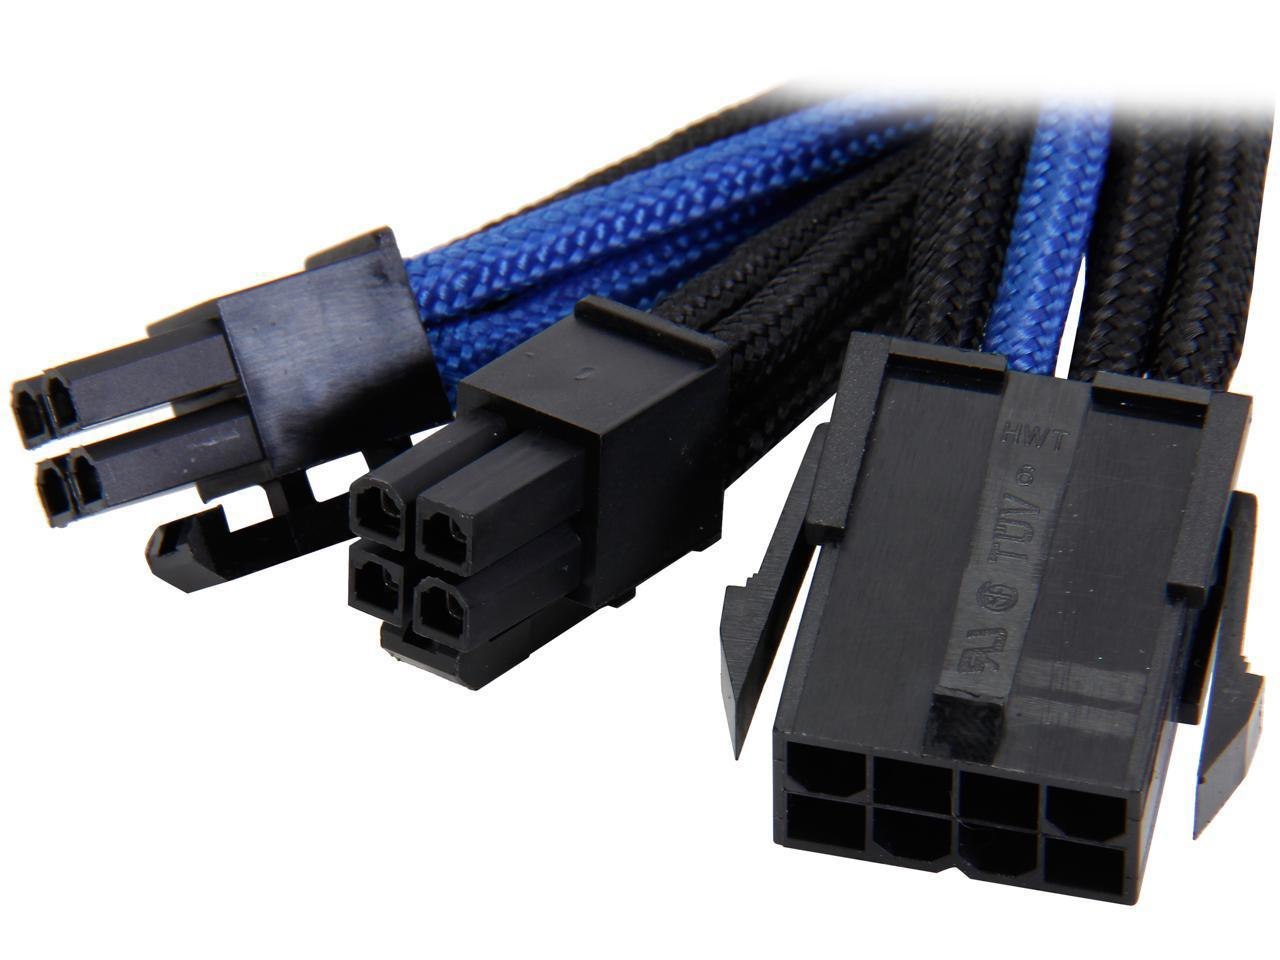 Silverstone Pp07-Eps8ba Sleeved Extension Power Supply Cable With 1 X 8Pin To Eps12v 8Pin(4+4) Connector - Black/Blue Female To Male